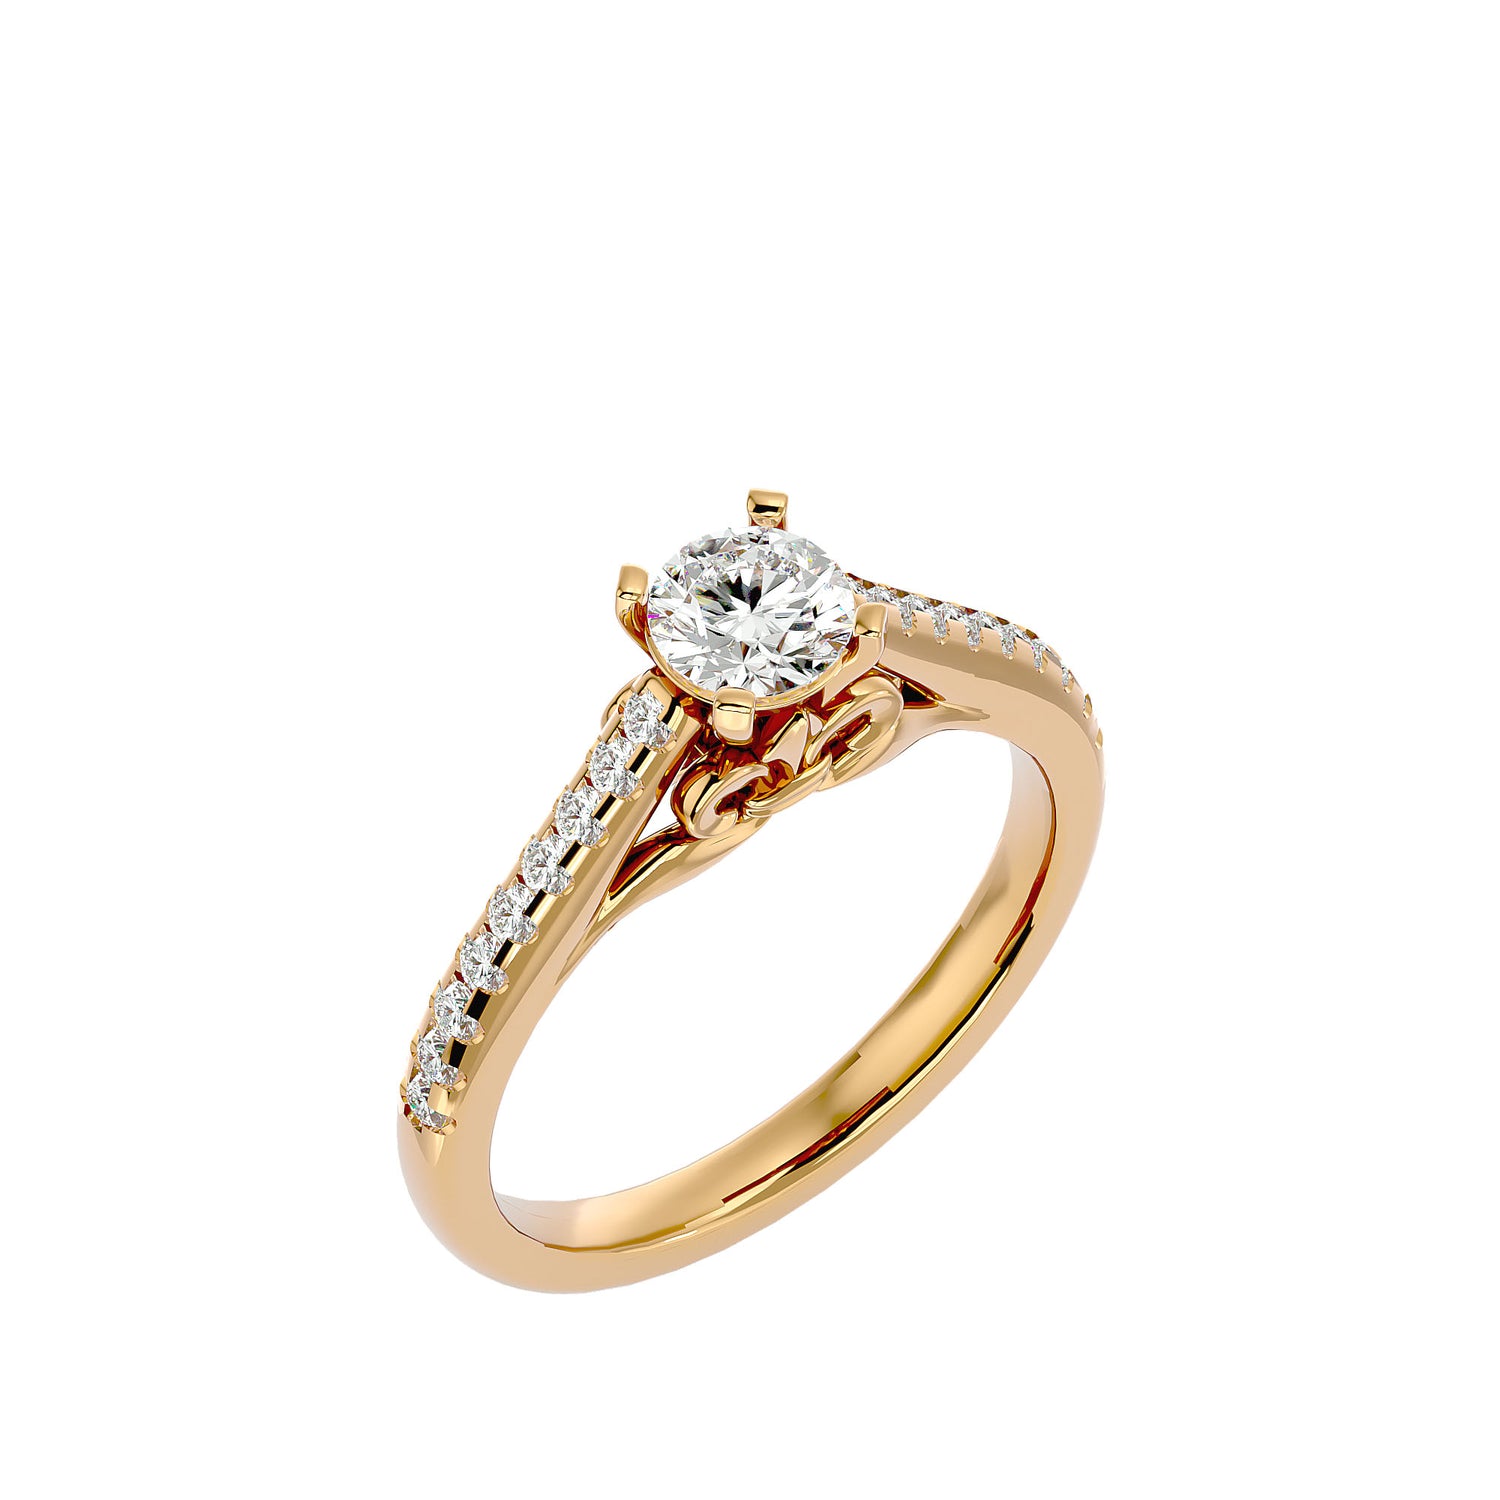 HOH Elise Diamond Solitaire Ring